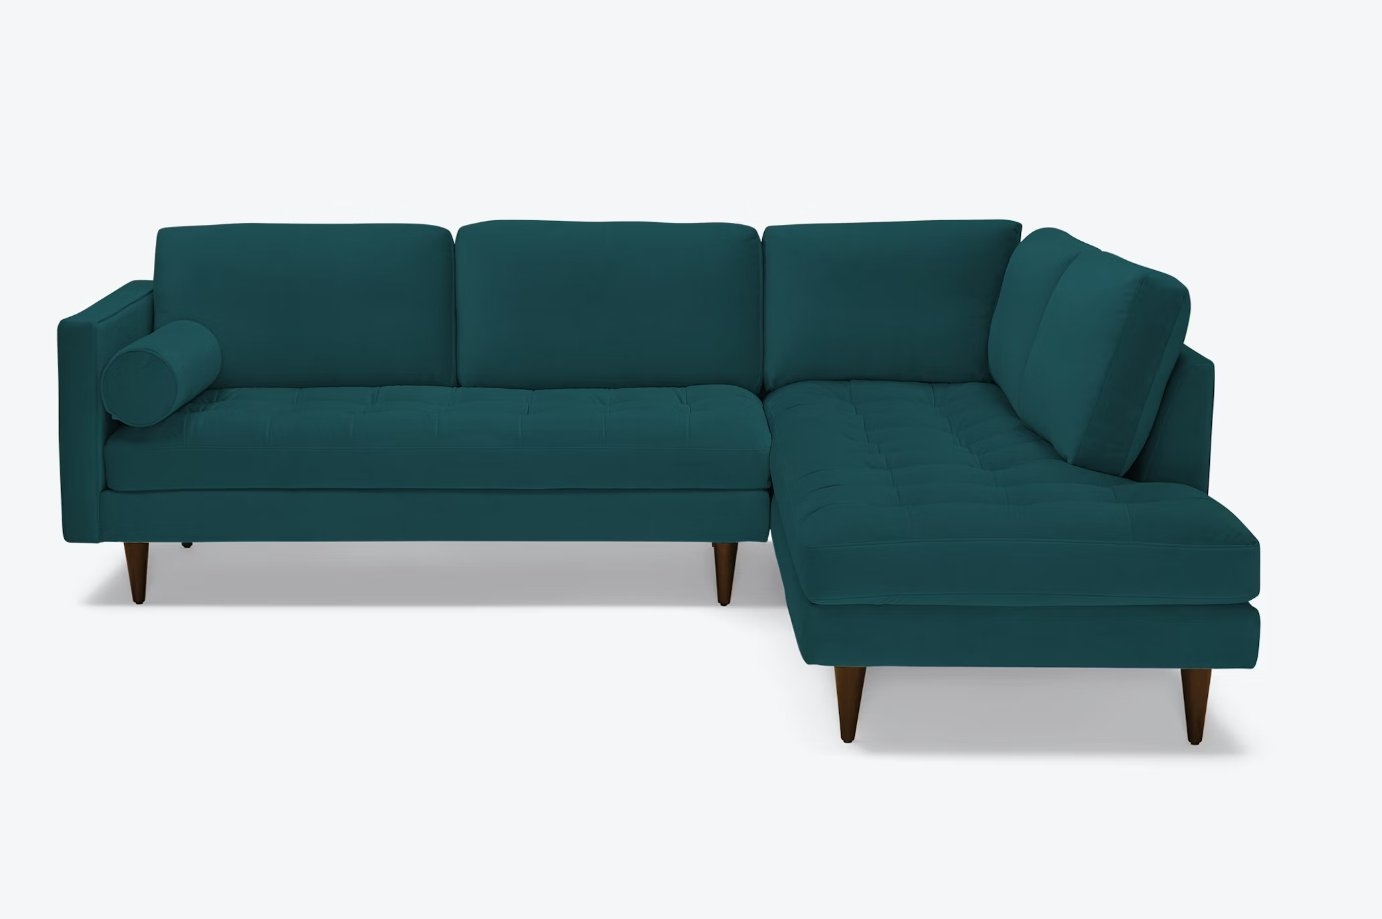 Blue Briar Mid Century Modern Sectional with Bumper - Royale Peacock - Mocha - Left - Image 6